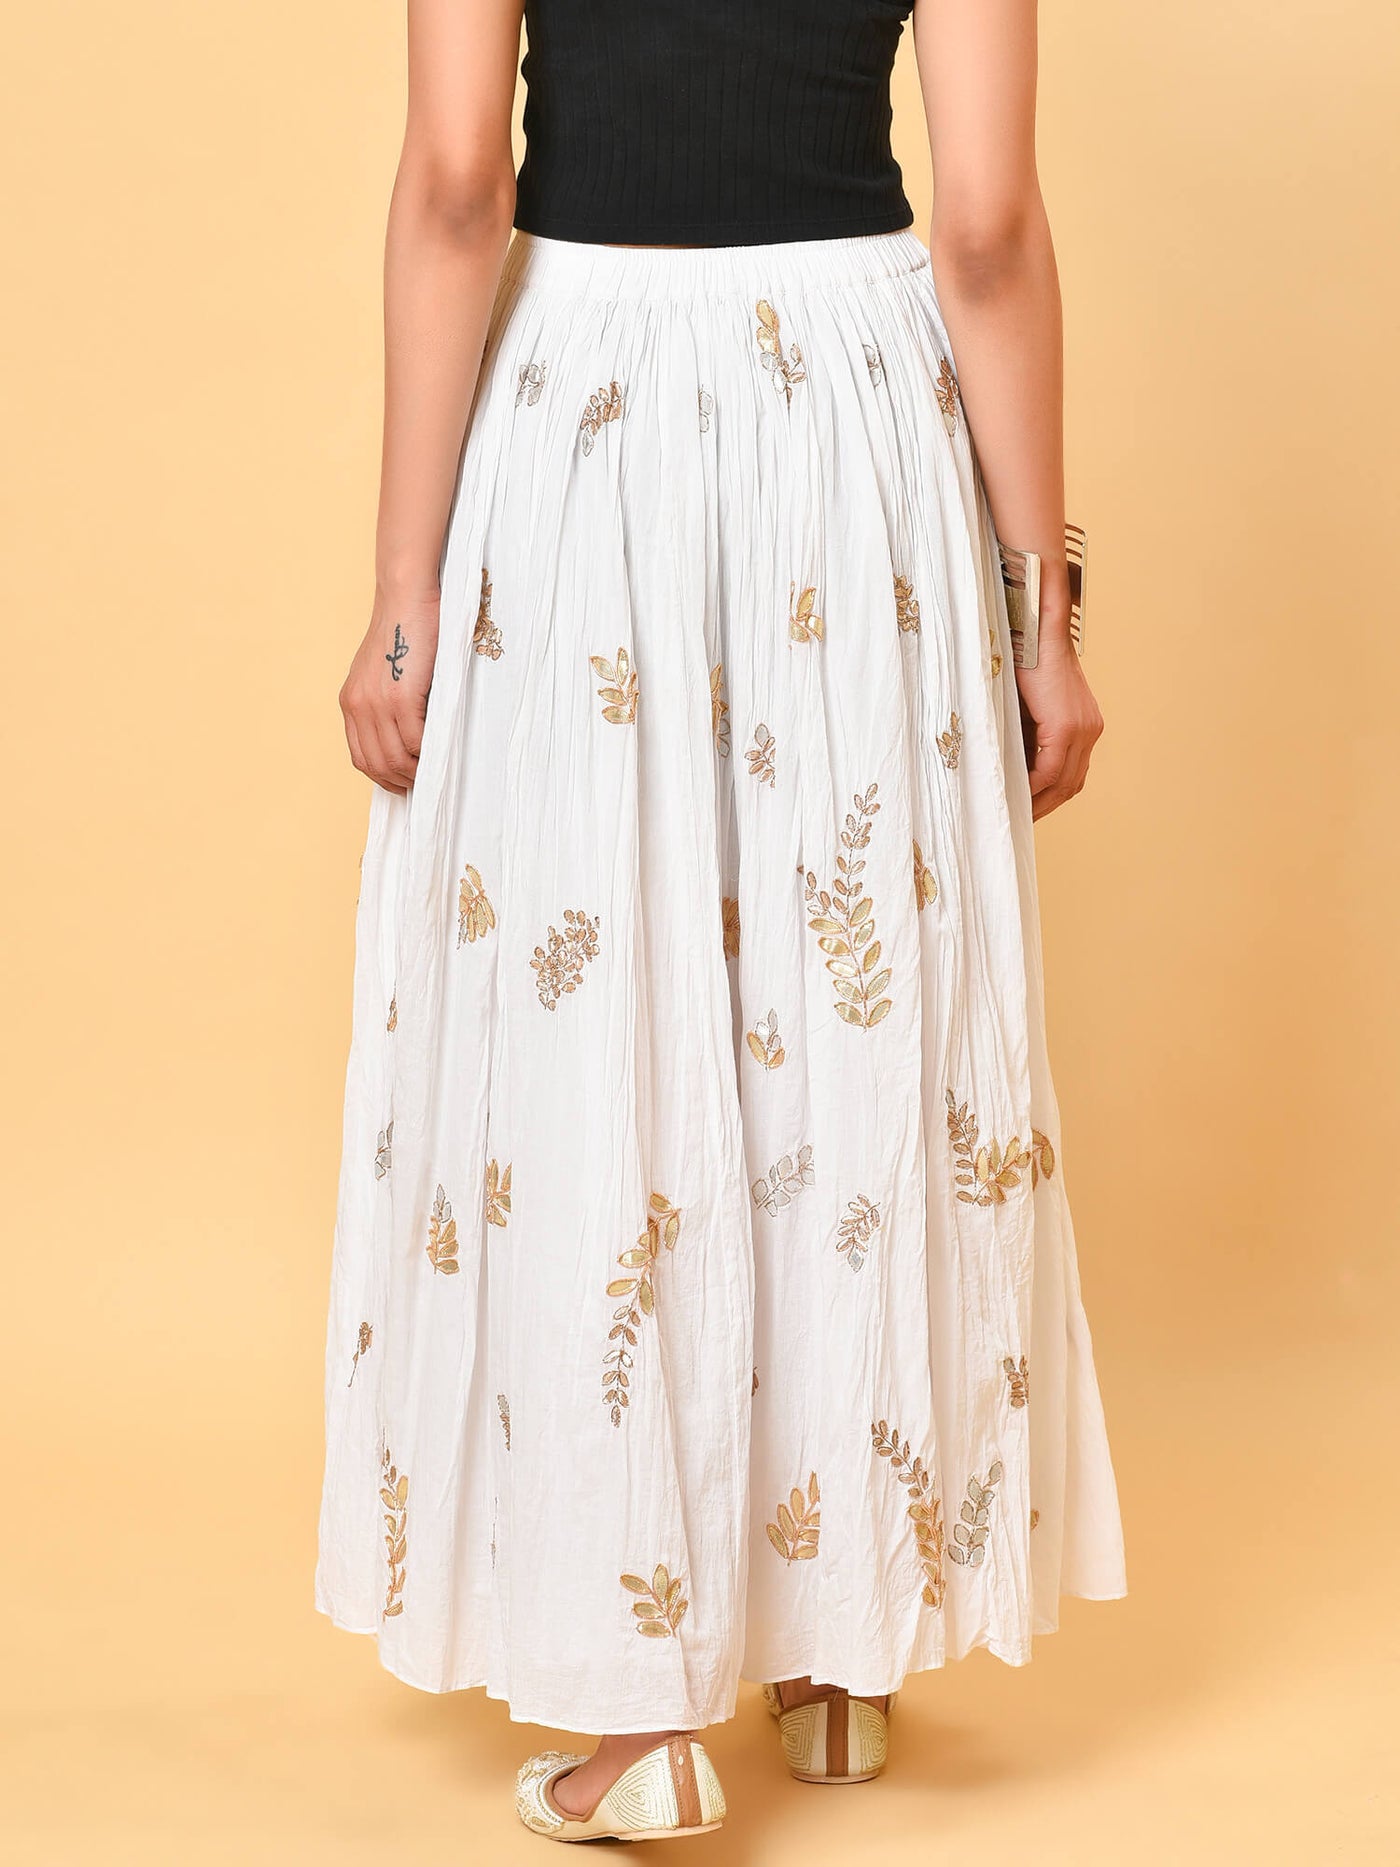 Champagne cotton crinkle skirt in white